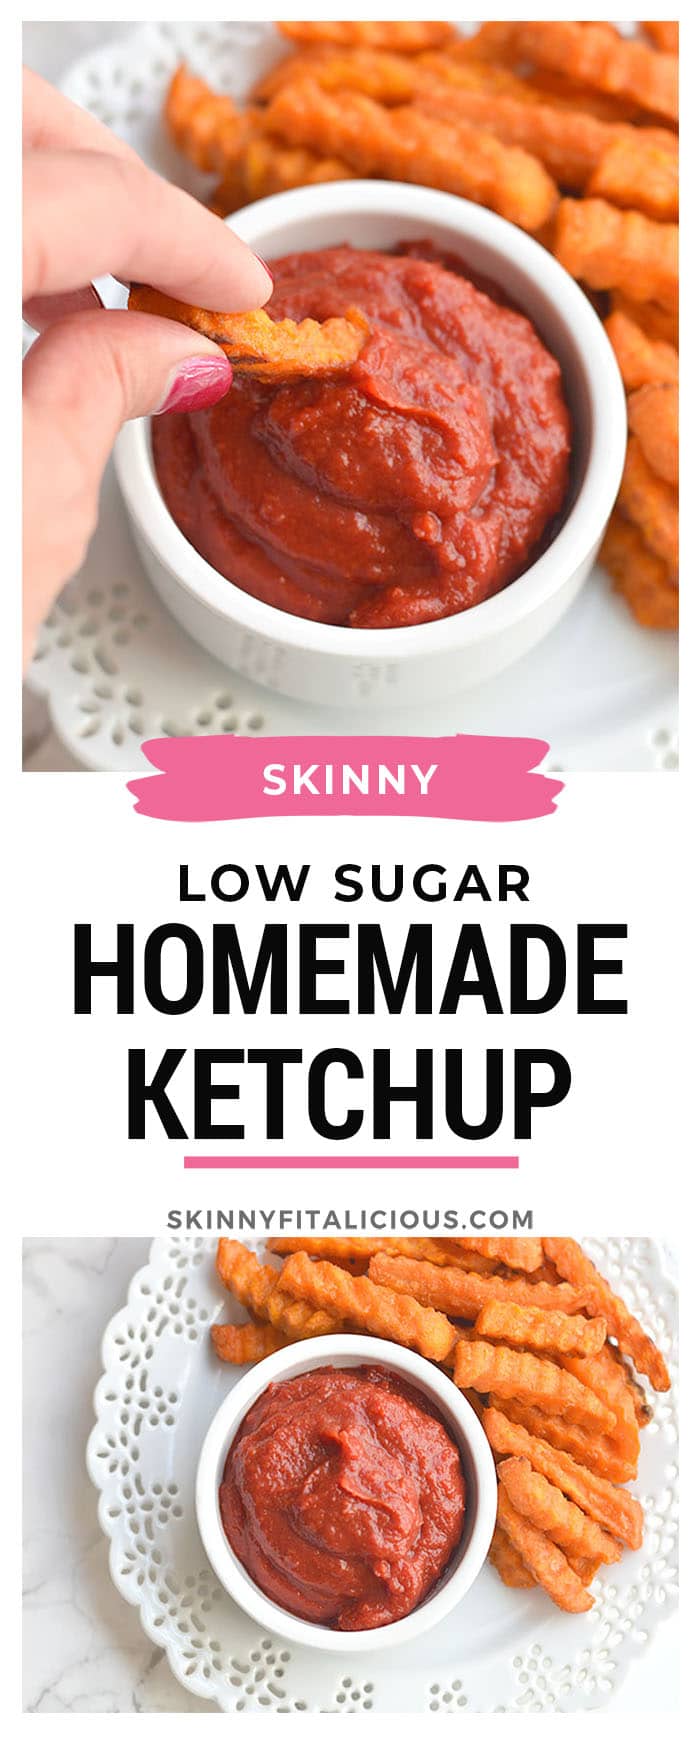 Low Sugar Ketchup! An easy homemade 5 minute ketchup recipe that's free of additives and low in sugar. Perfect for dipping and topping all your favorite foods with! Paleo + Vegan + Low Calorie + Gluten Free